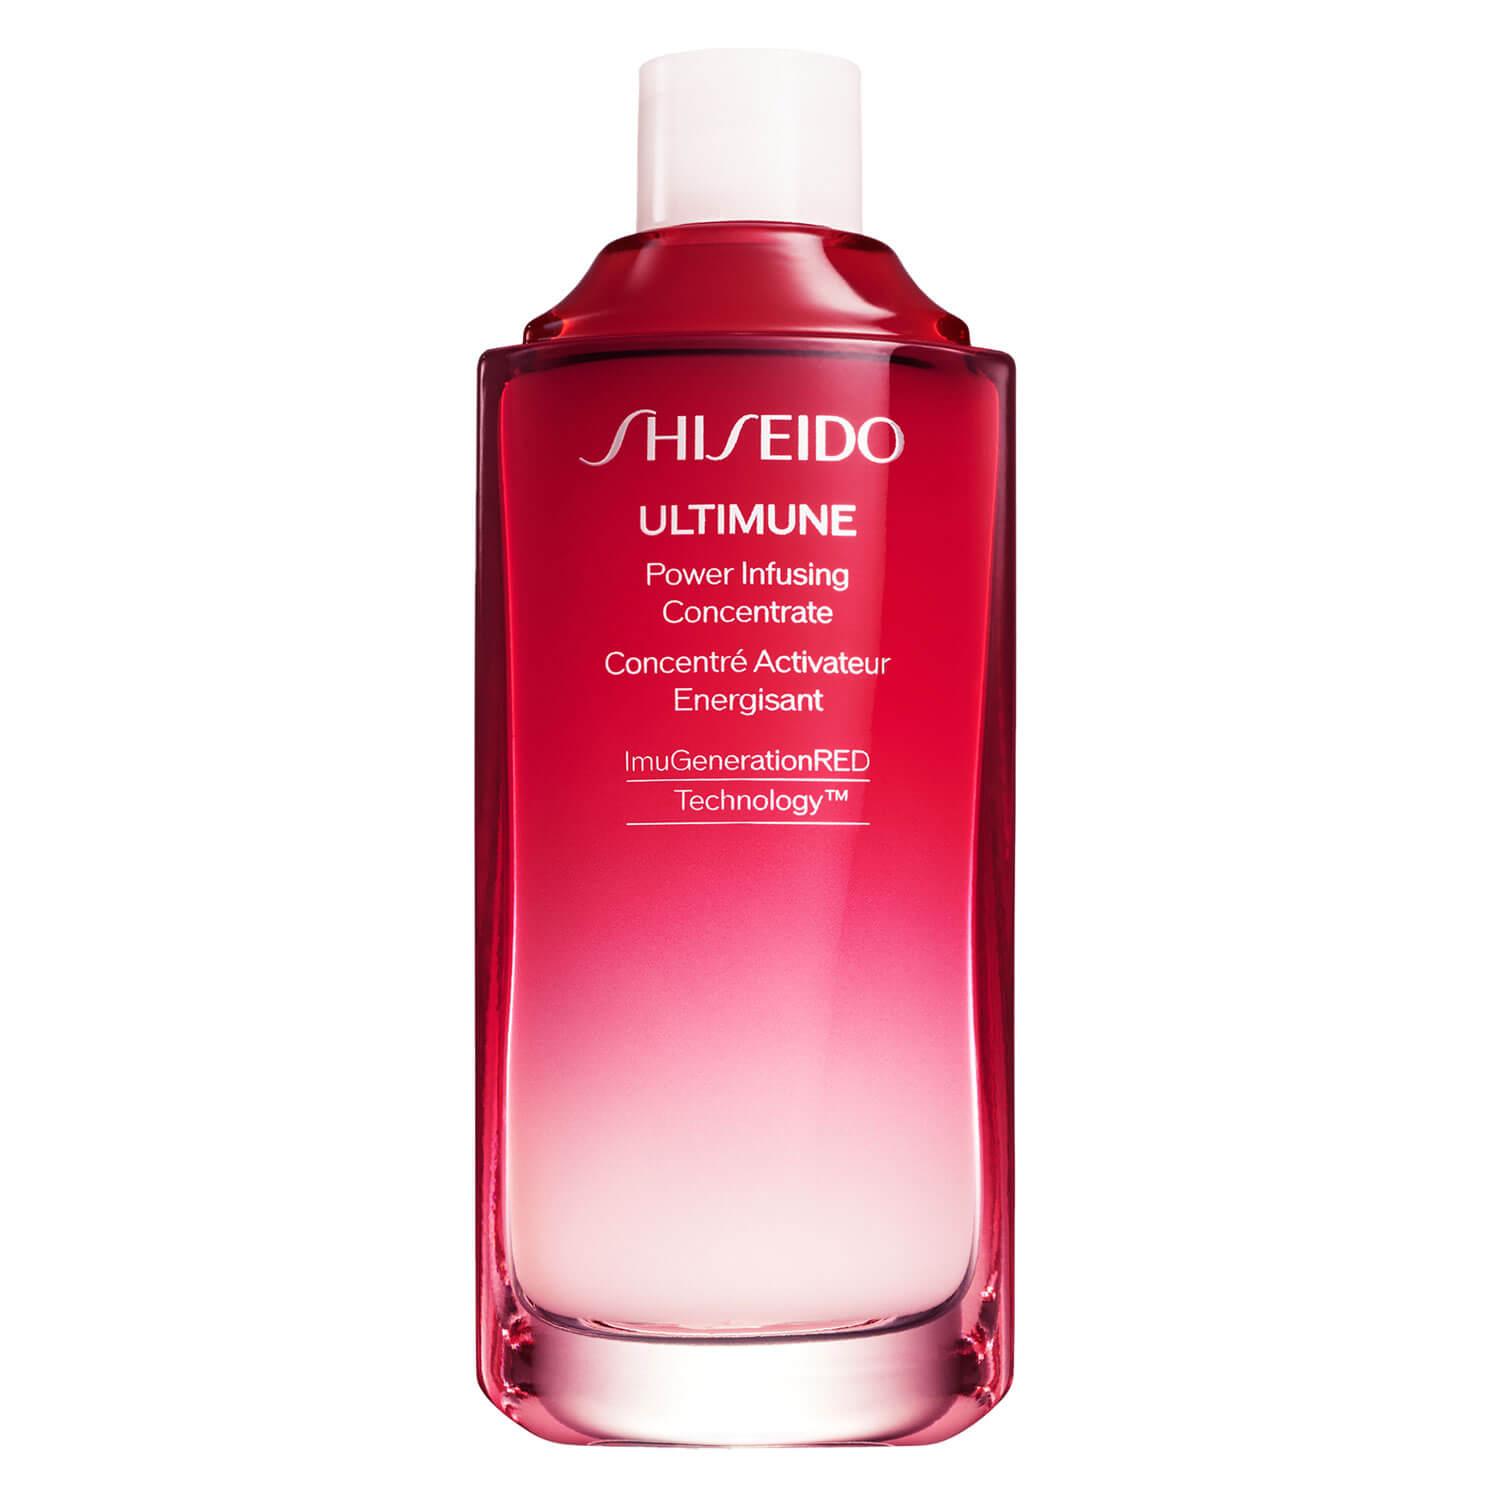 Ultimune - Power Infusing Concentrate 3.0 Refill